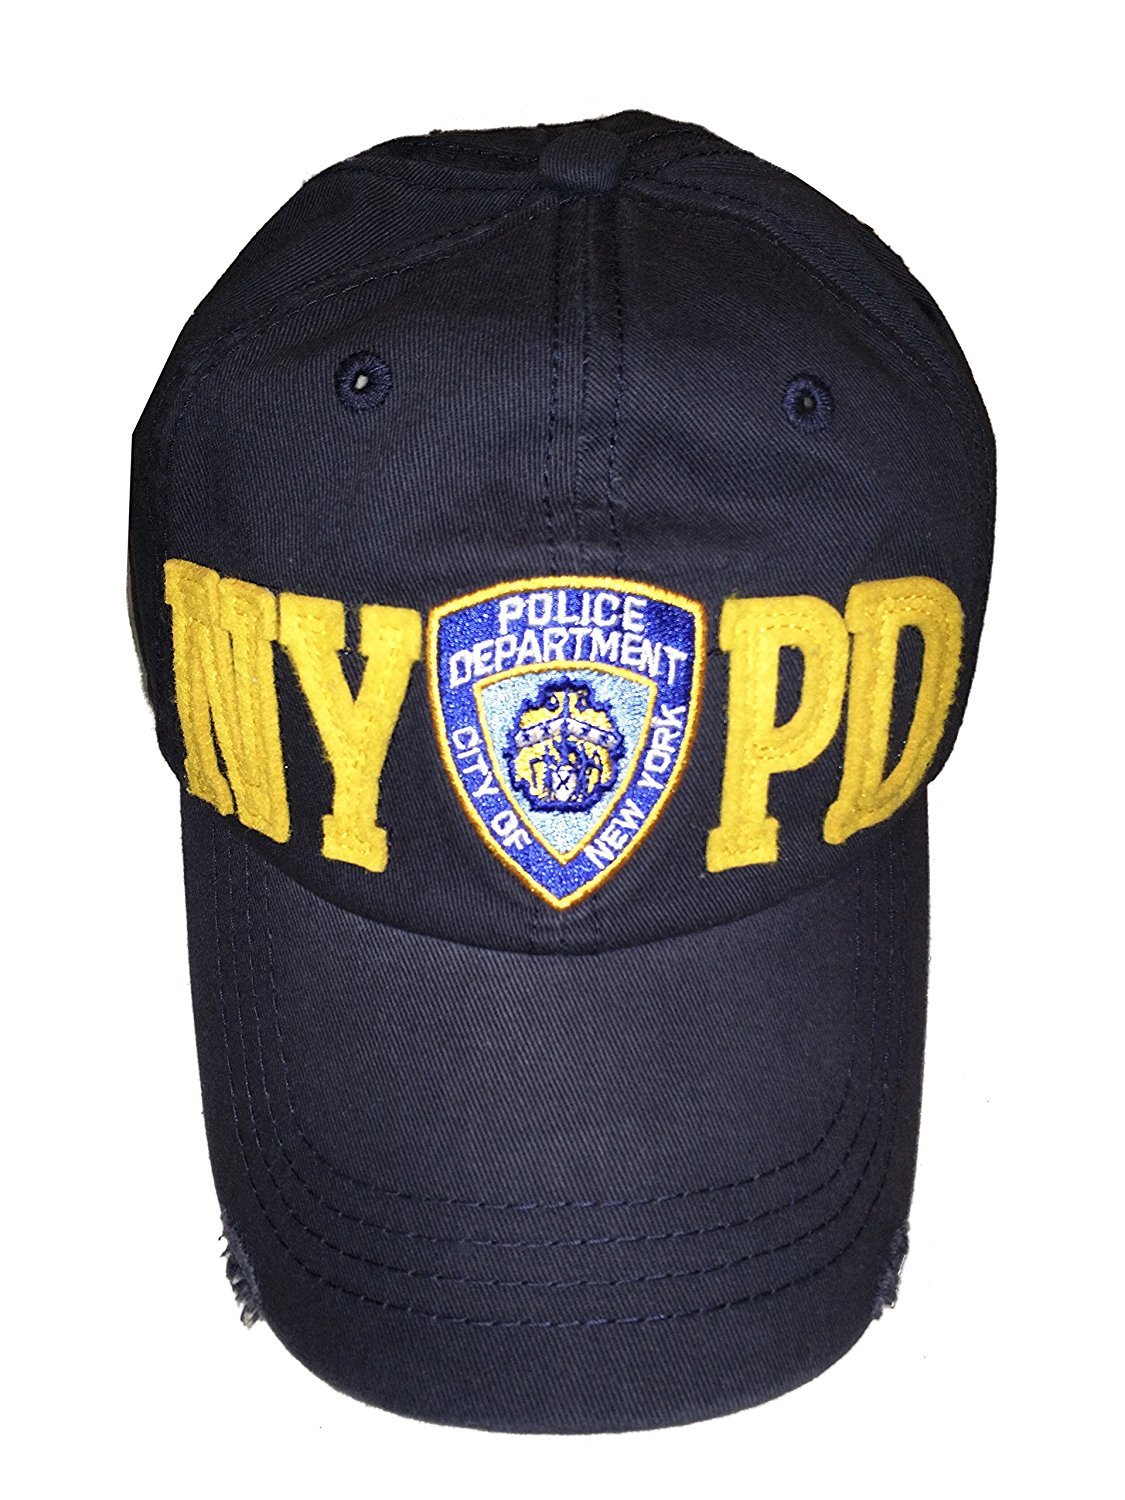 NYPD Baseball Hat New York Police Department Big Gold Distressed Navy Blue